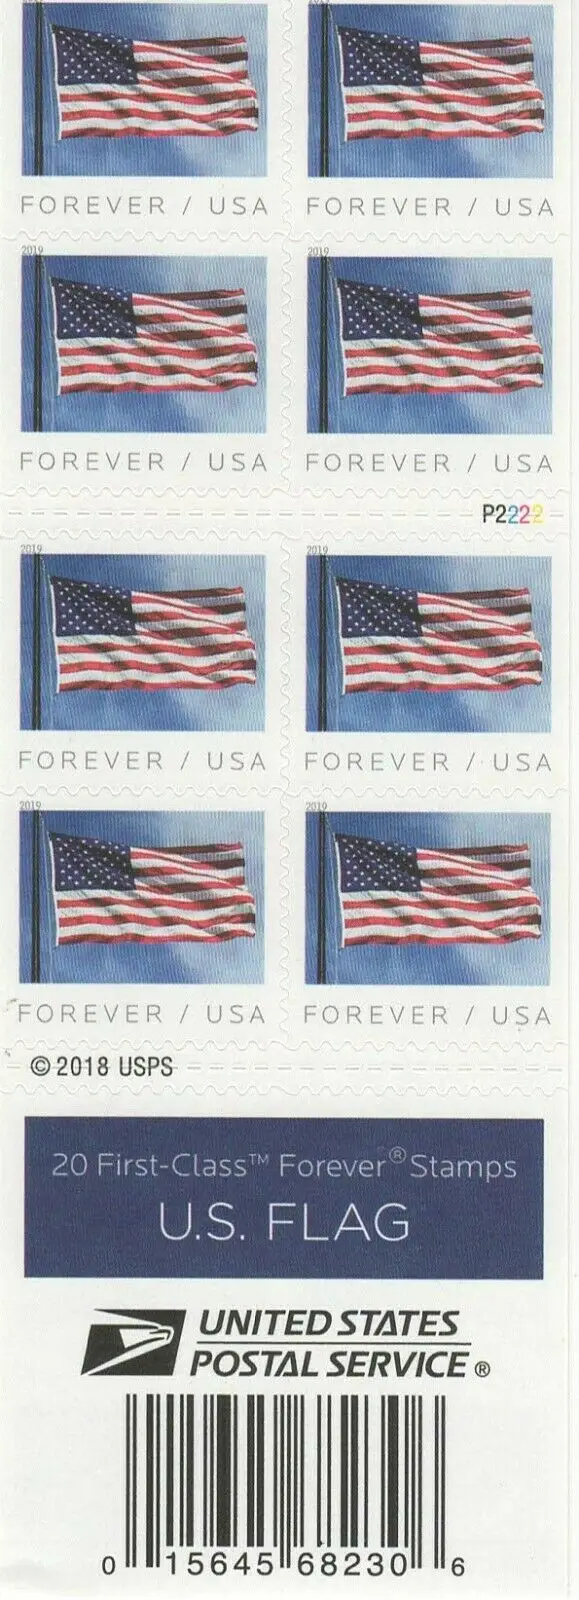 

2019 US Flag 5 Books of 20 USPS Forever First Class Postage Stamps Patriotic American Celebration (100 Stamps)